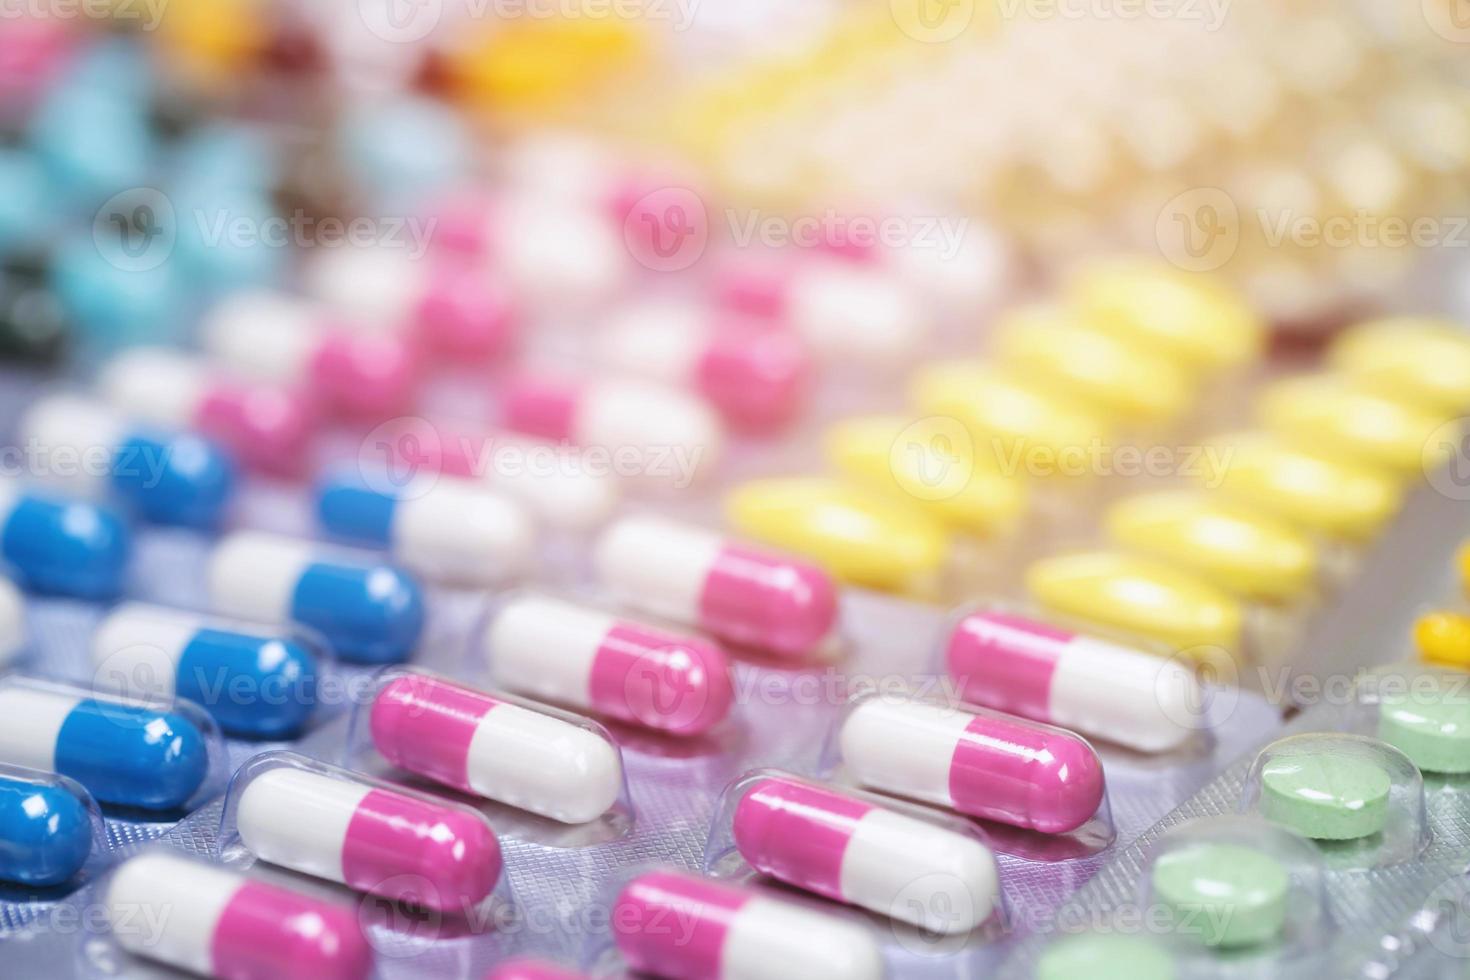 close up pharmaceuticals antibiotics pills medicine in blister packs stack pile. colorful antibacterials pills Pharmacy. capsule pill medicine Antimicrobial drug resistance. Pharmaceutical industry photo